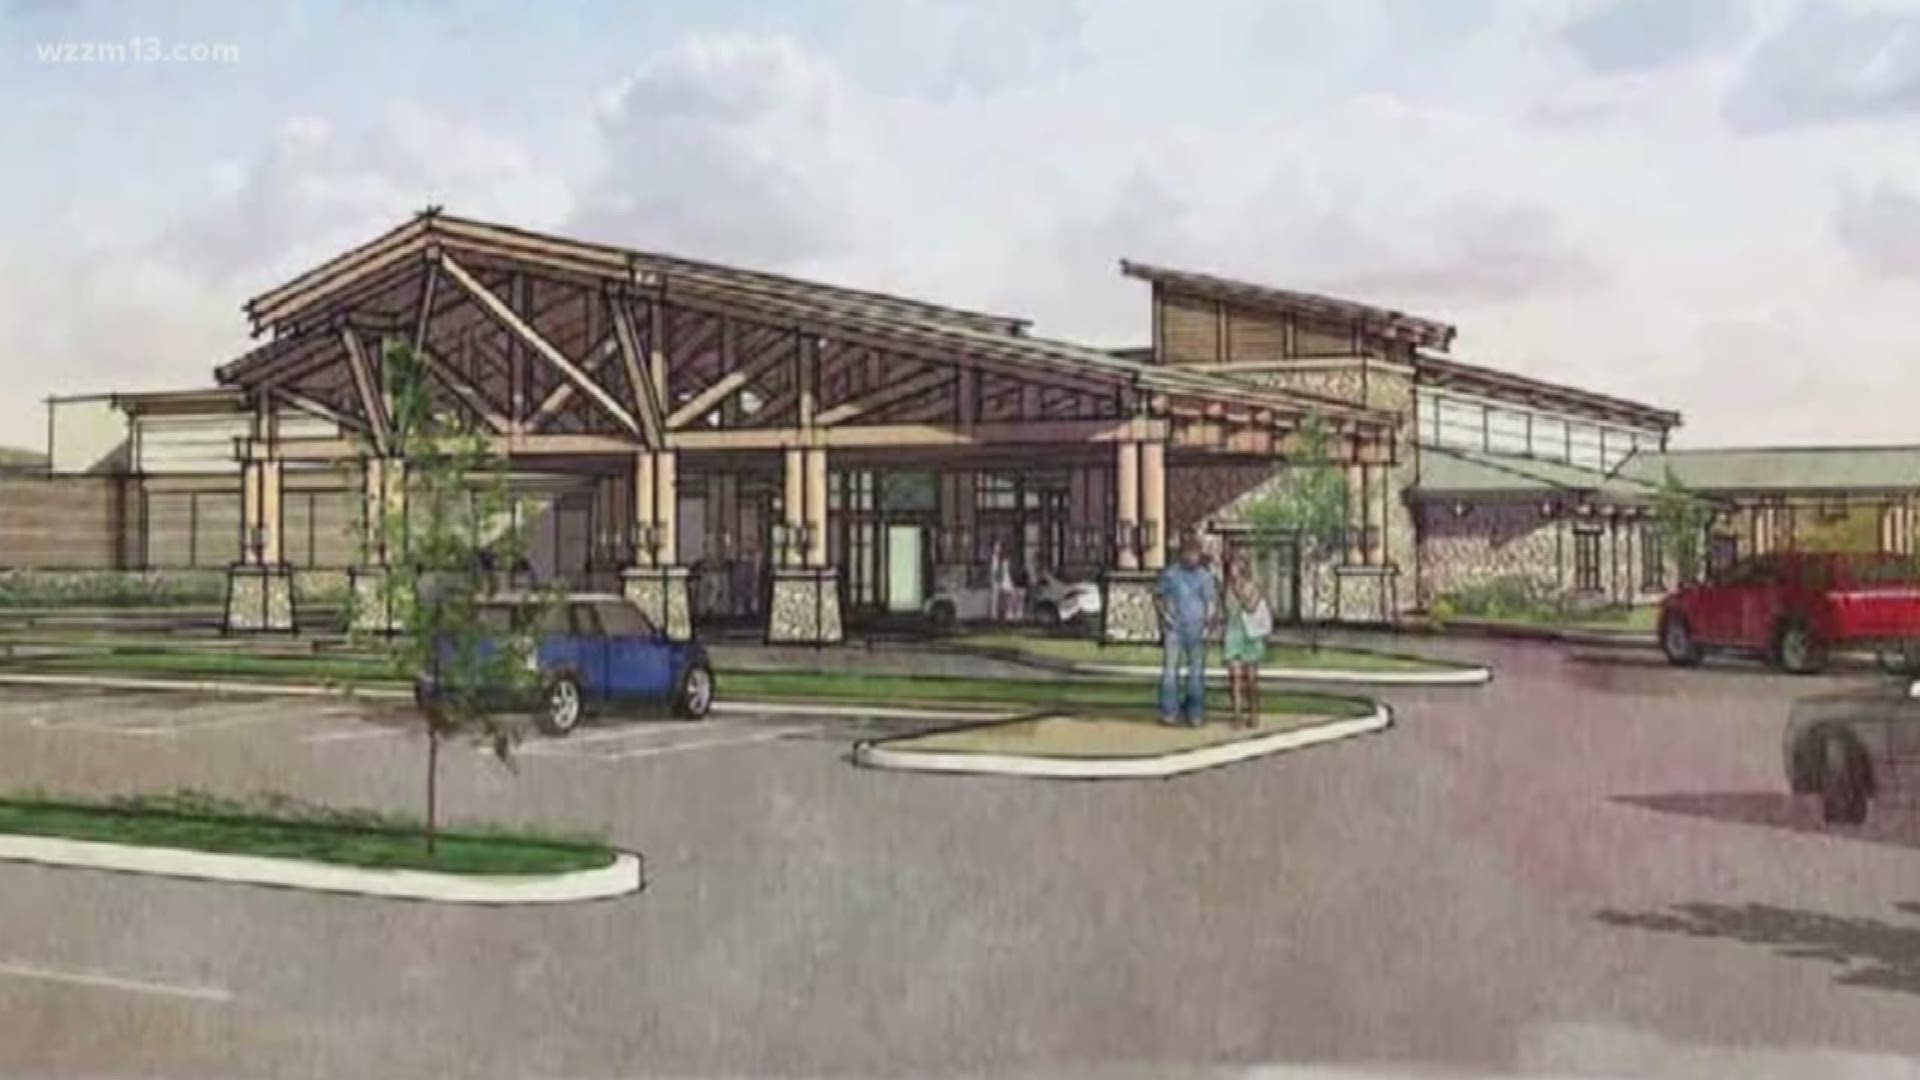 Update on progress of proposed casino in Muskegon County